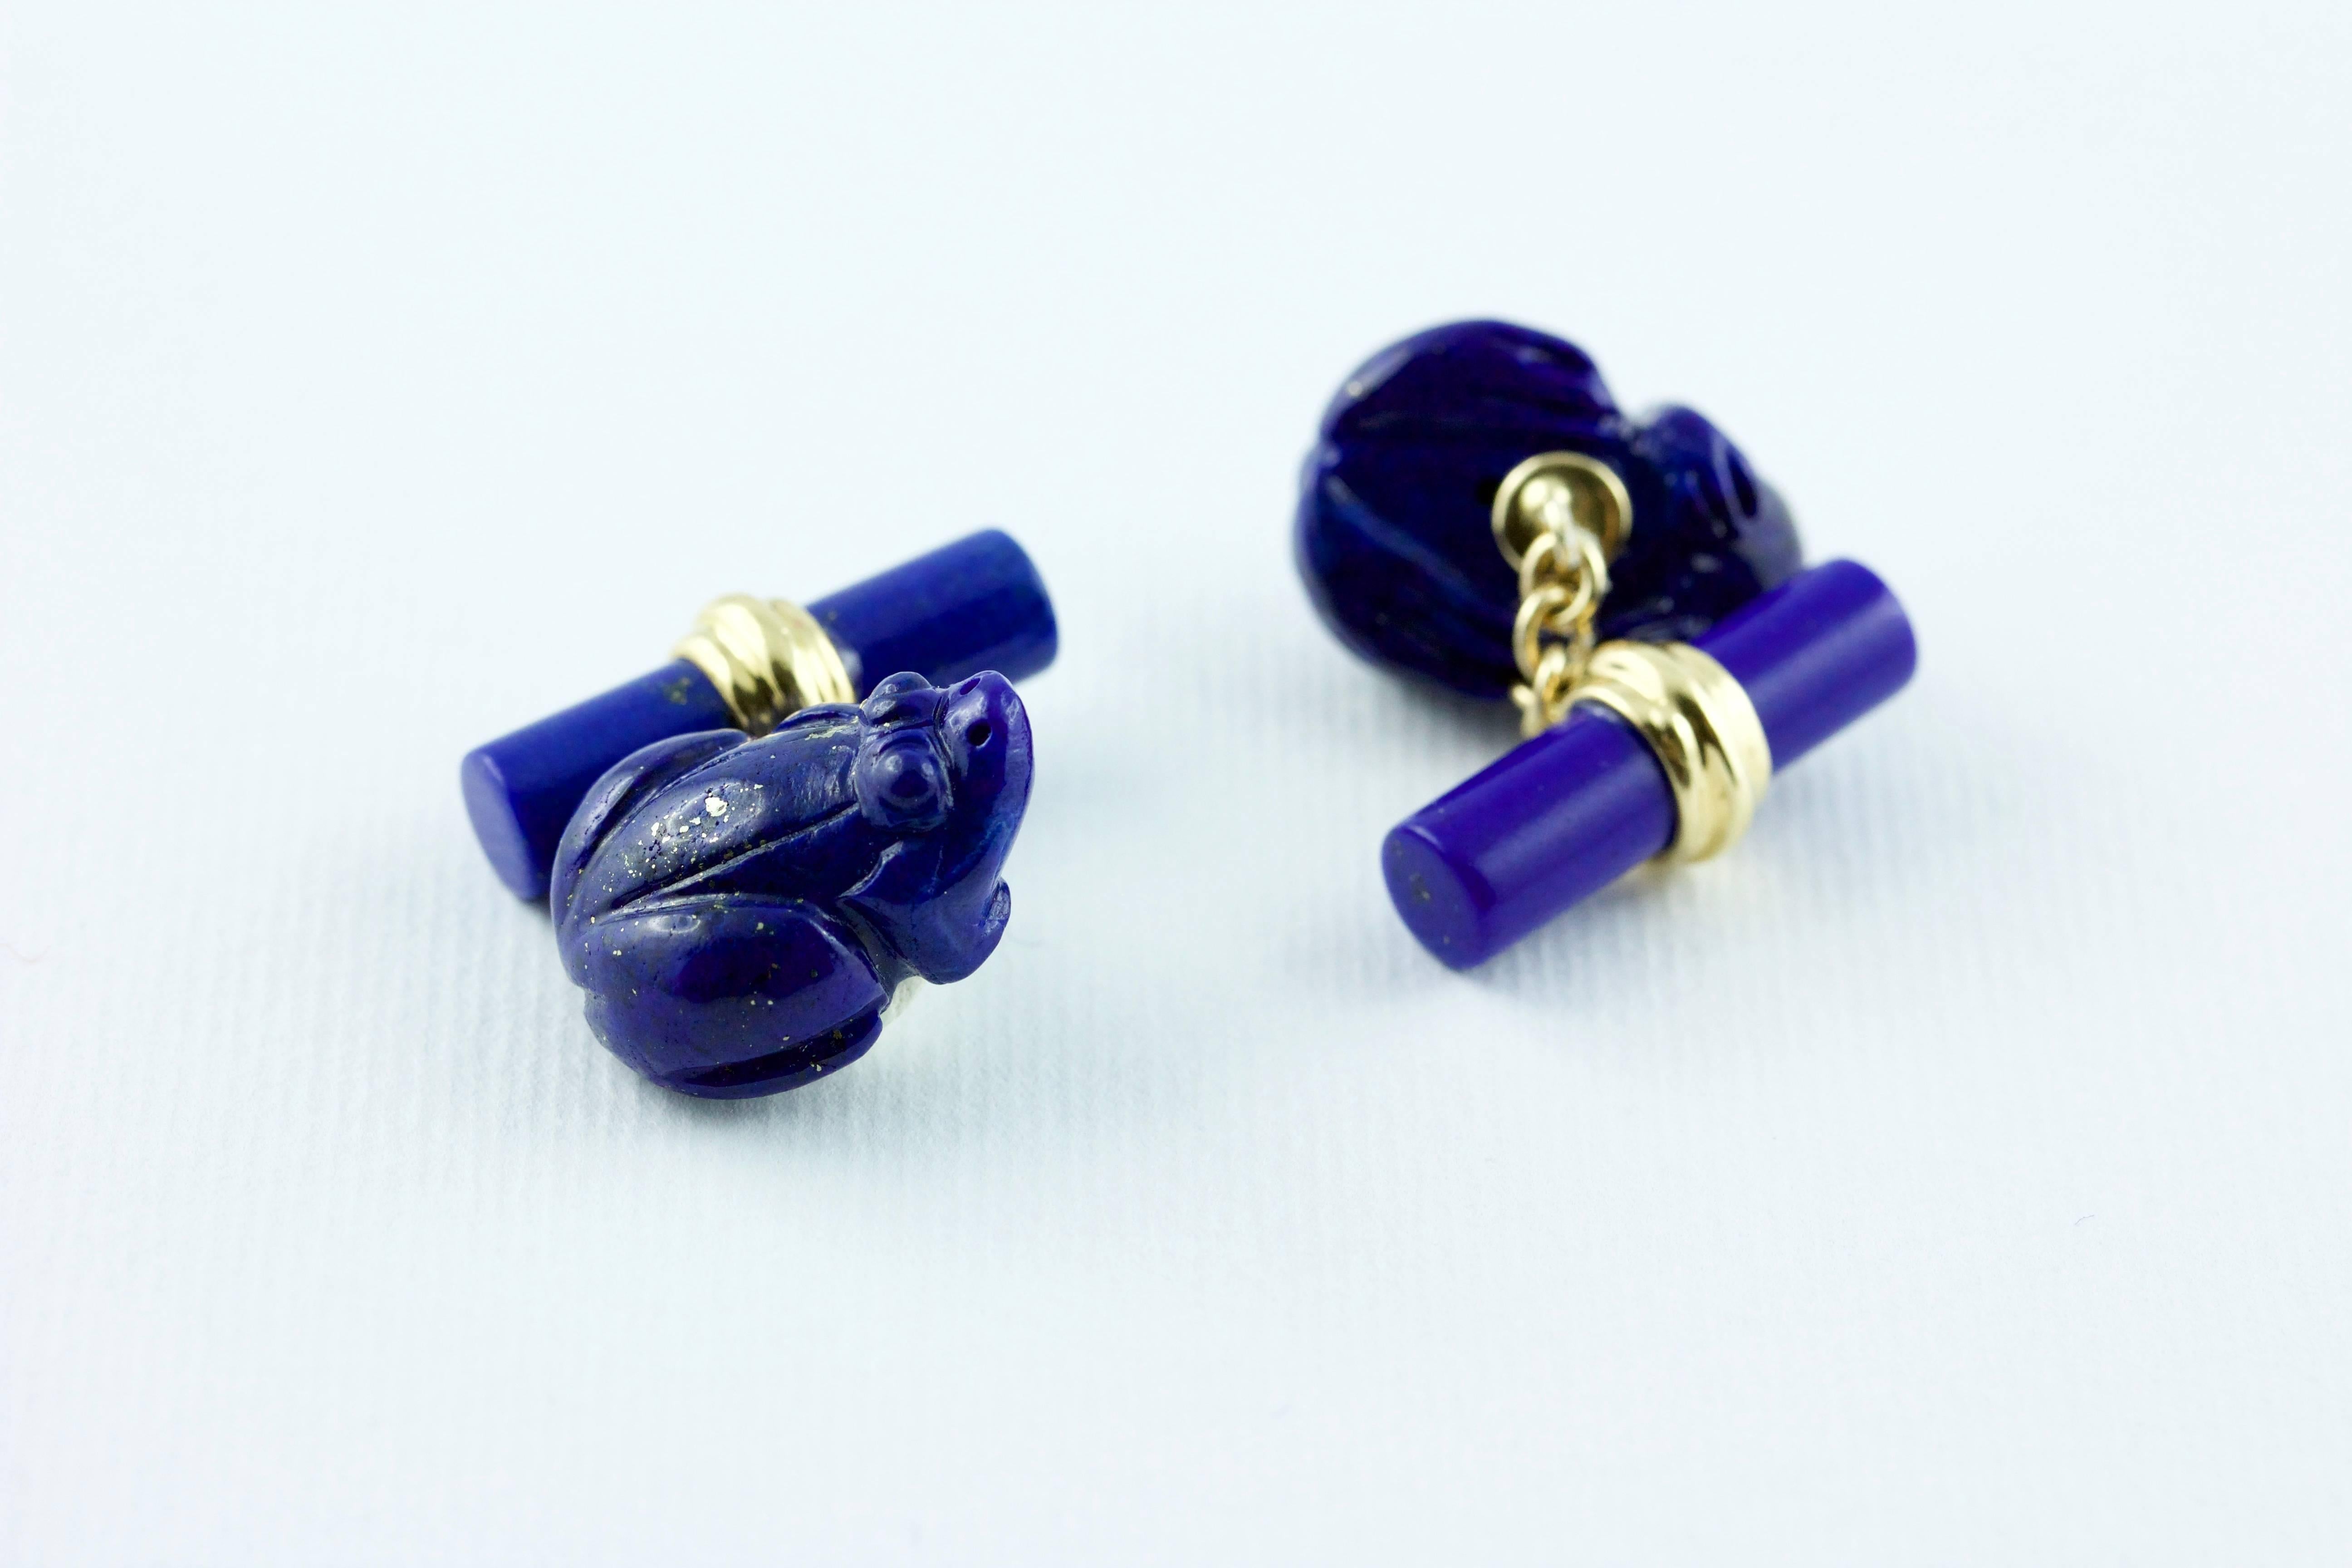 This playful pair of cufflinks is made of Lapis Lazuli and its front face is carved to depict the body a frog made of Lapis Lazuli. The simple back toggle is a piece of cylindrical Lapis Lazuli, while an 18k yellow gold post connects these two